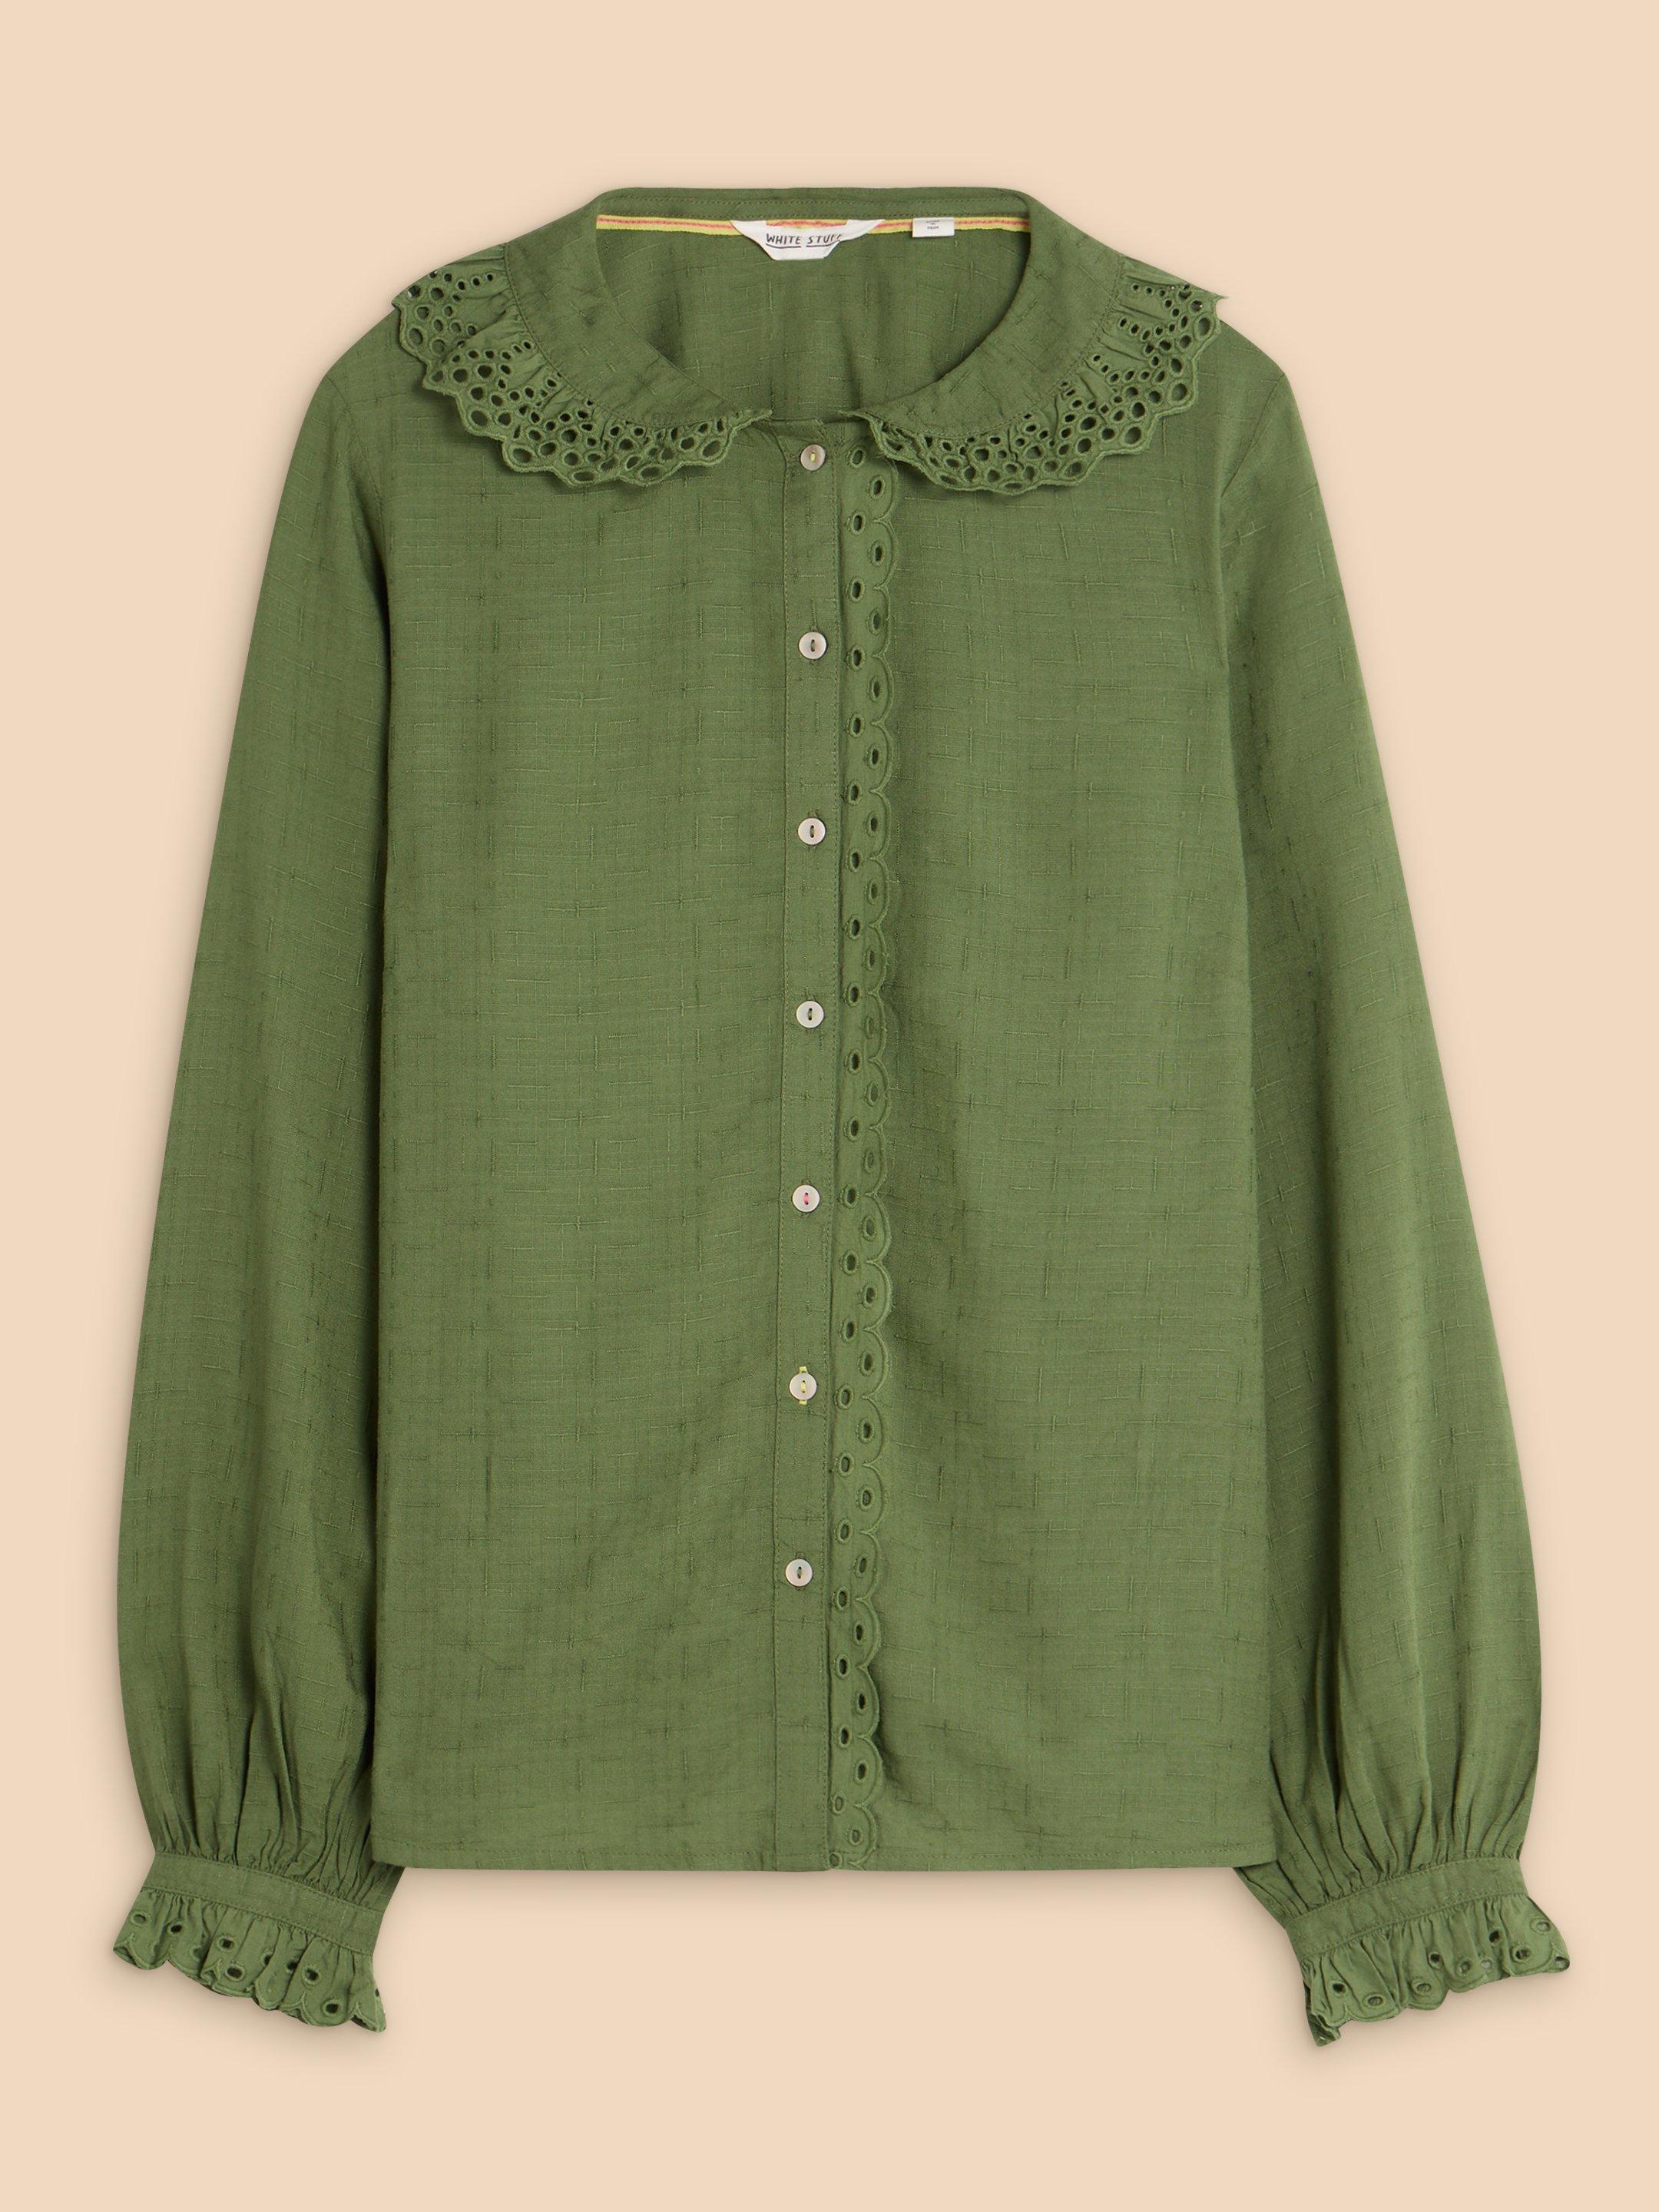 Lara Broderie Shirt in MID GREEN - FLAT FRONT